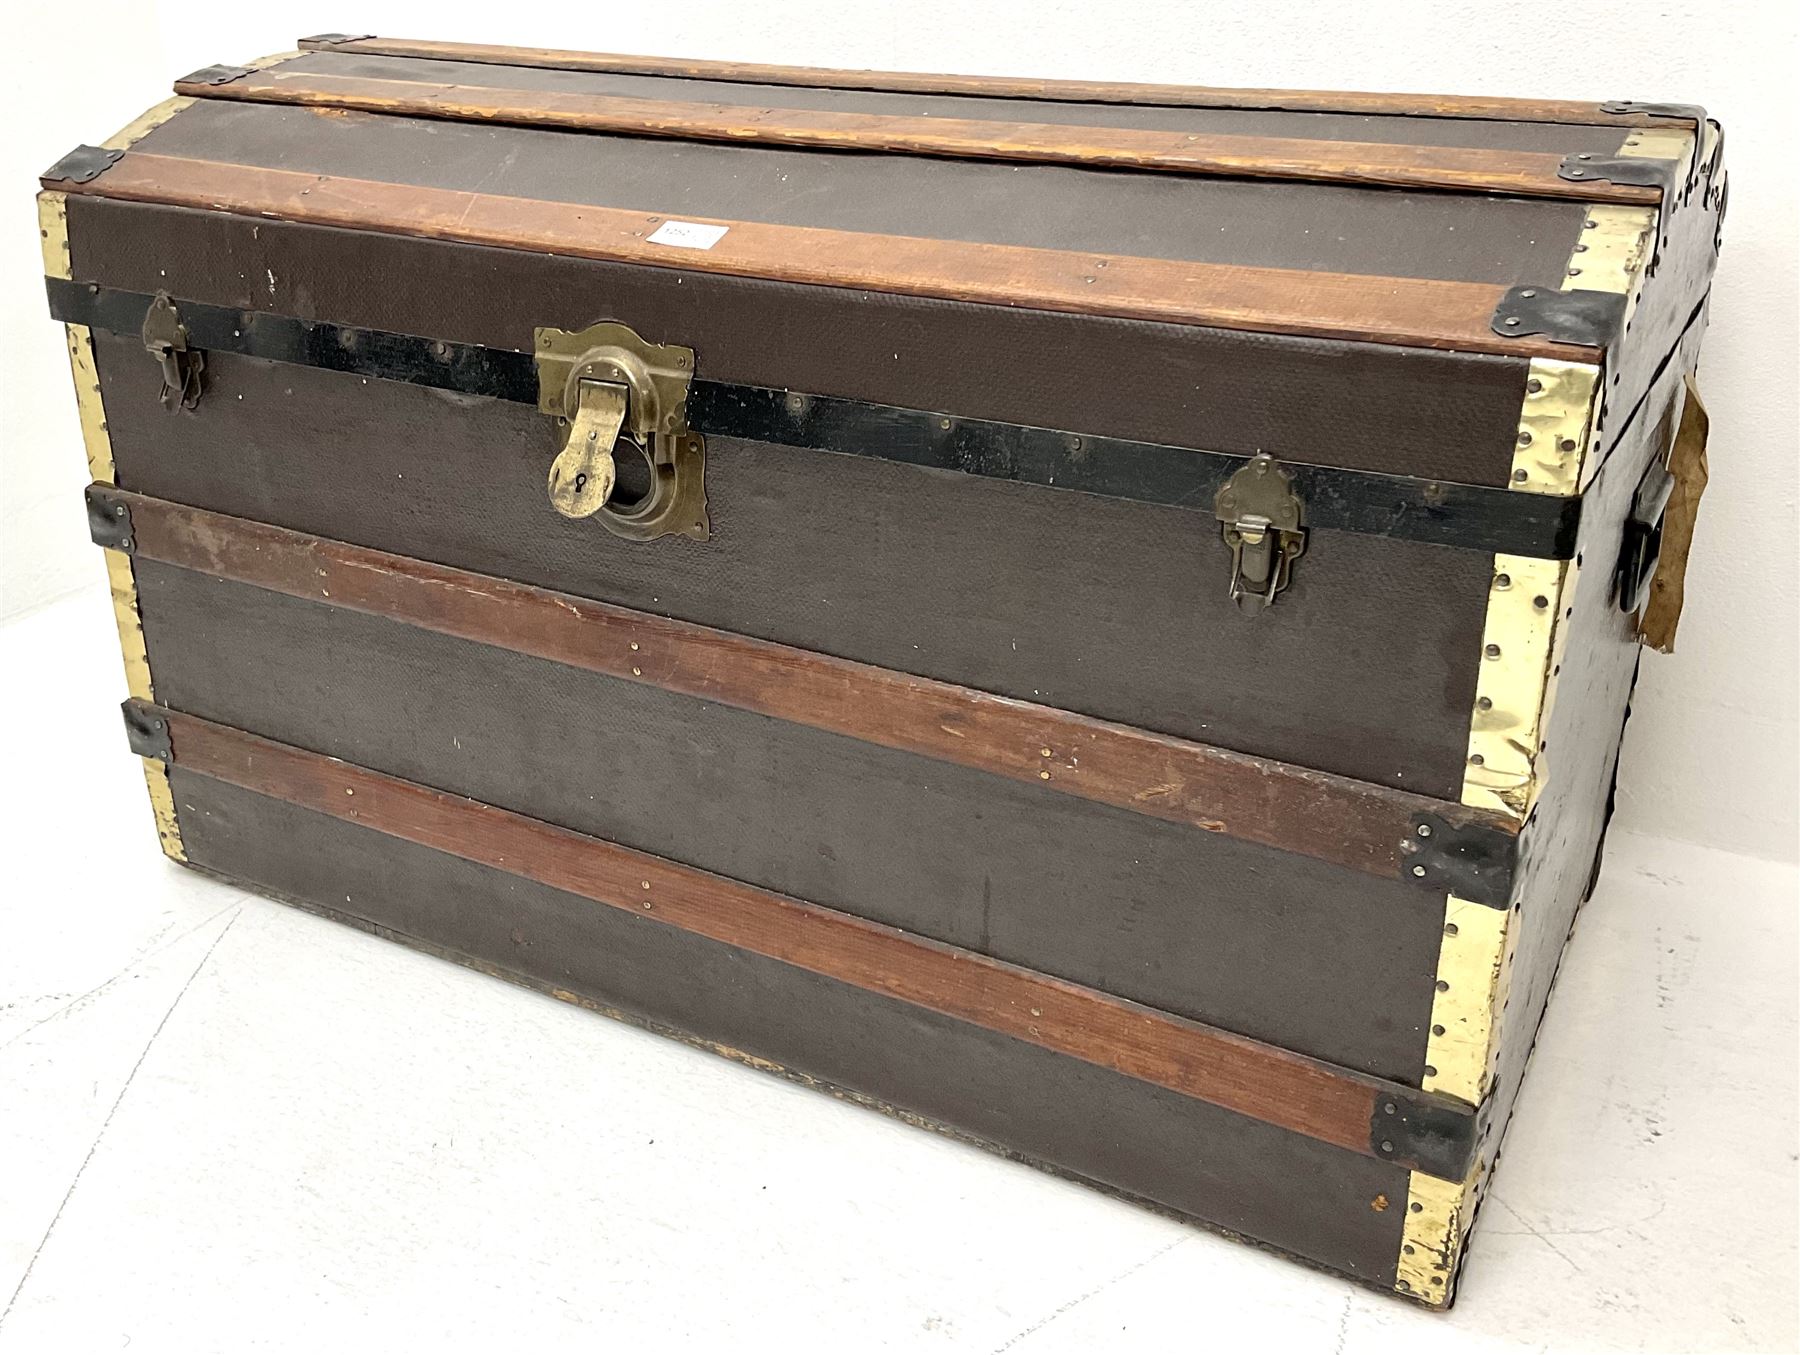 Early 20th century wood and metal bound chest